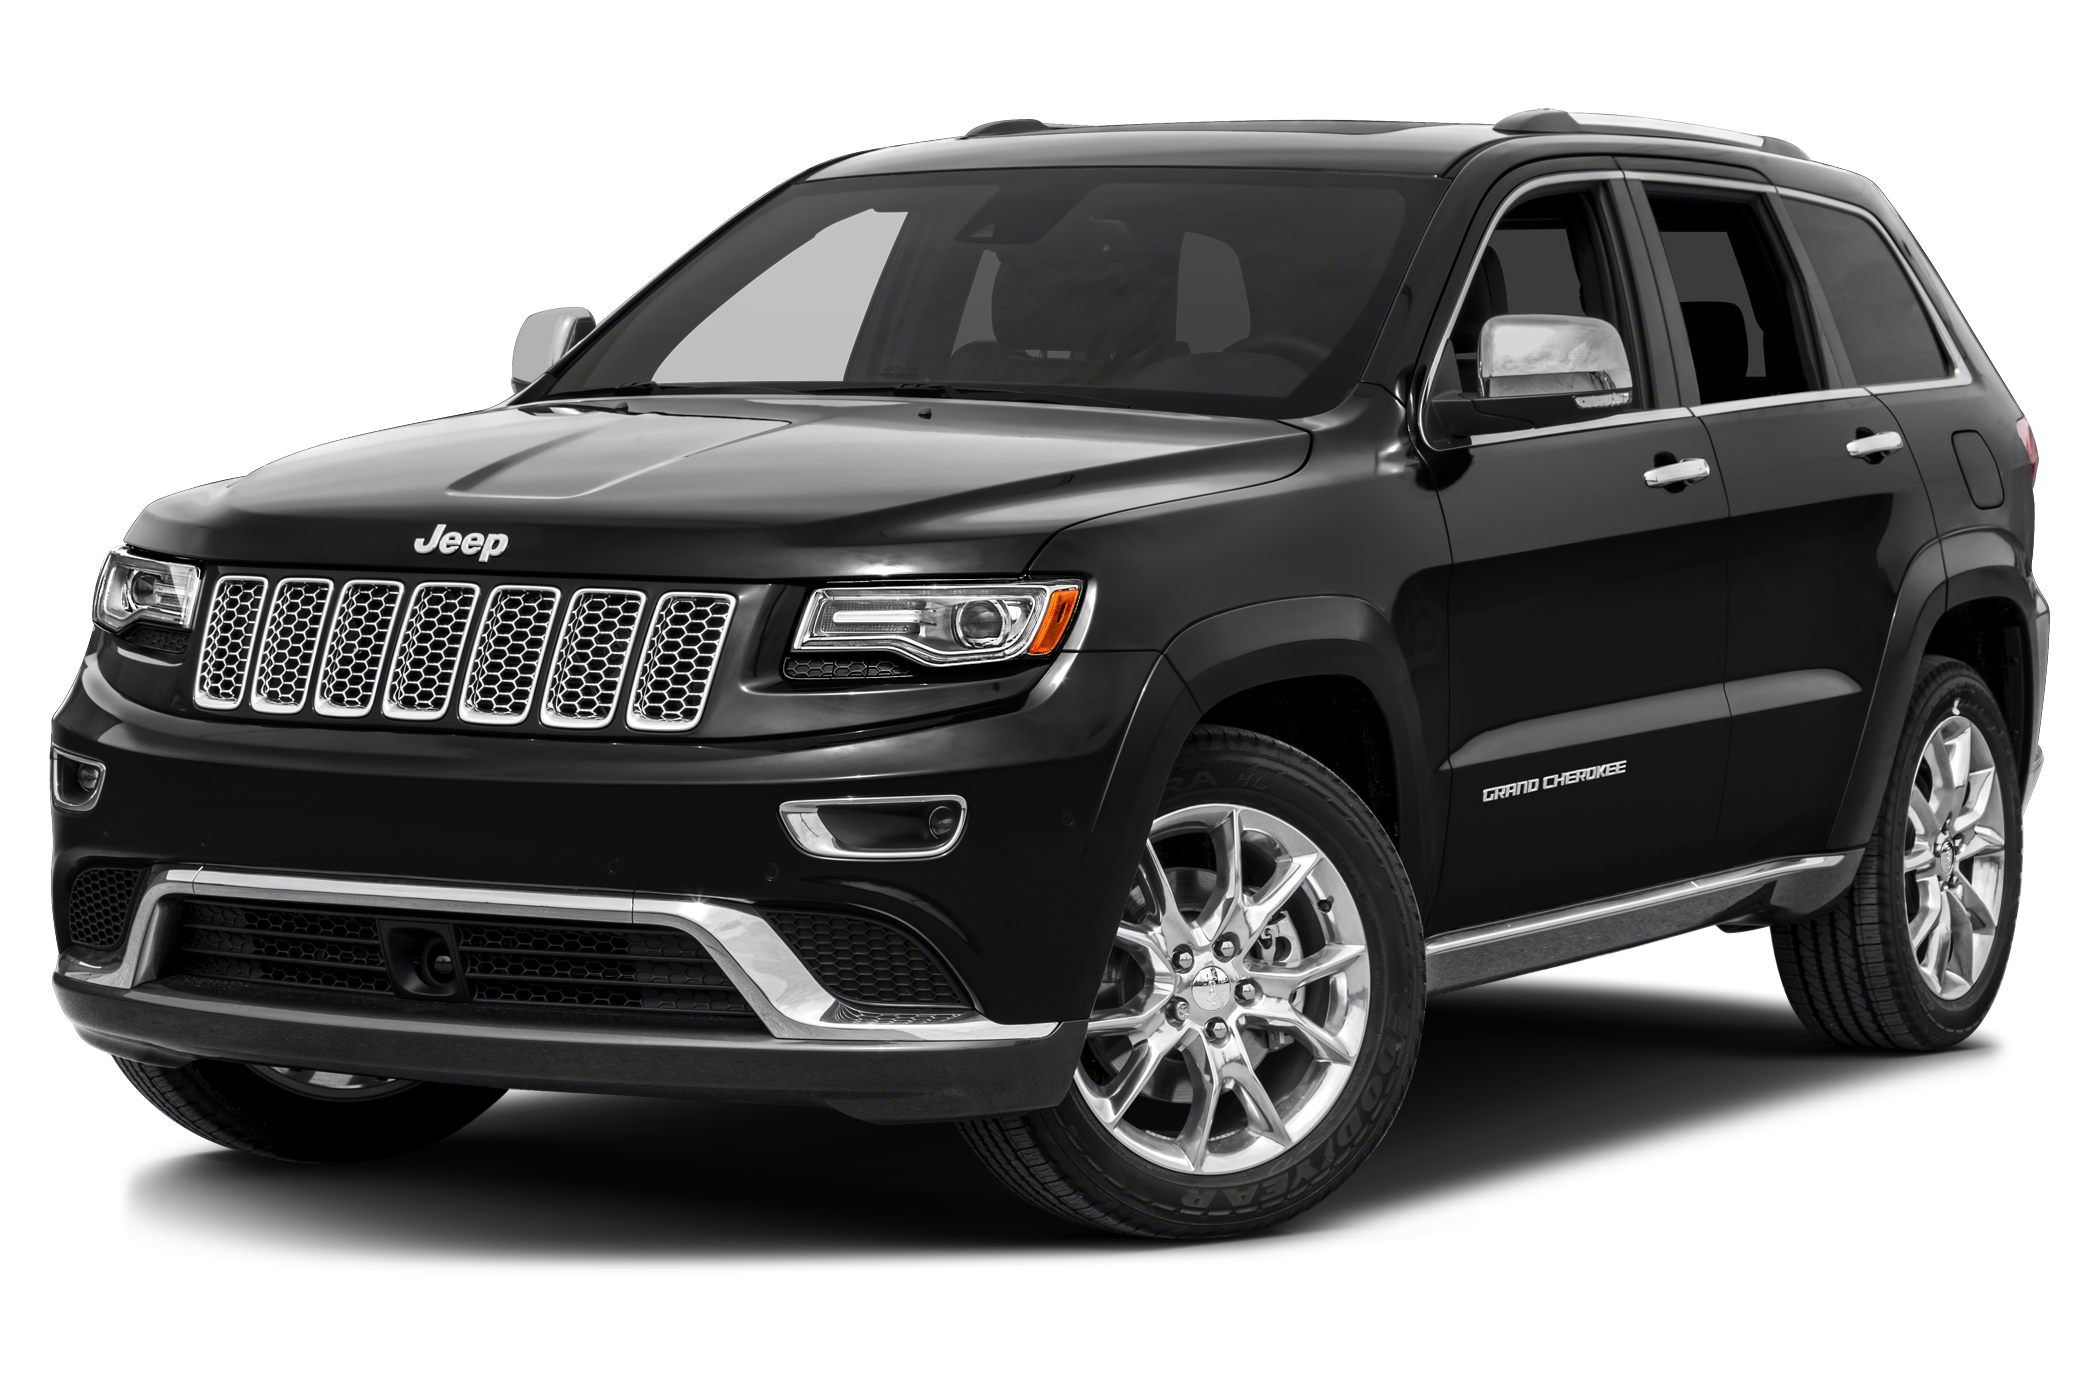 2015 Jeep Grand Cherokee Summit 4dr 4x2 Pictures